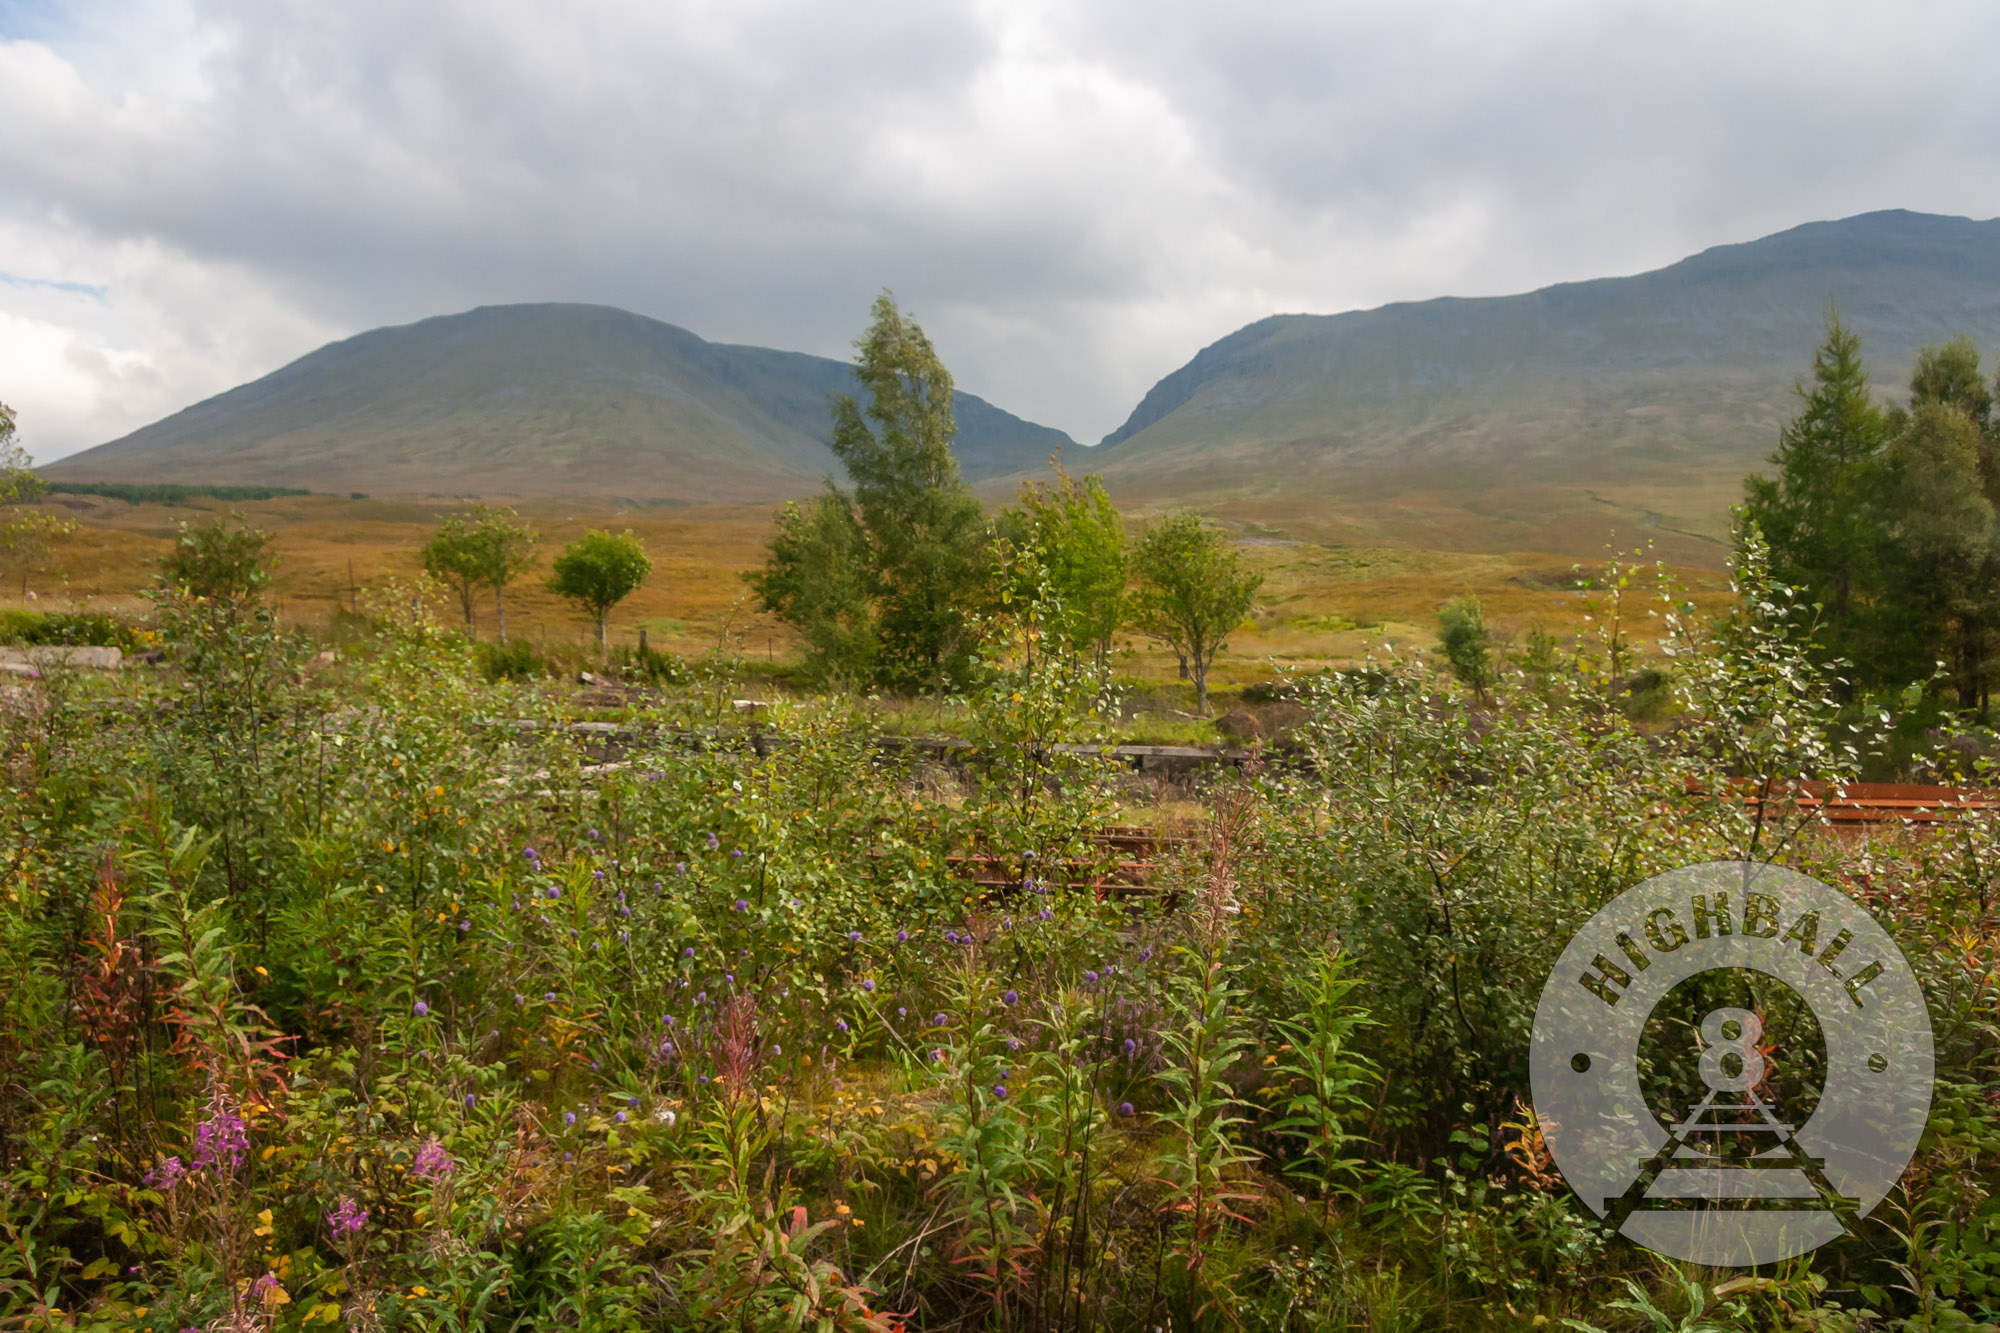 View from a Mallaig-bound West Highland Line train on Rannoch Moor, Scotland, UK, 2010.